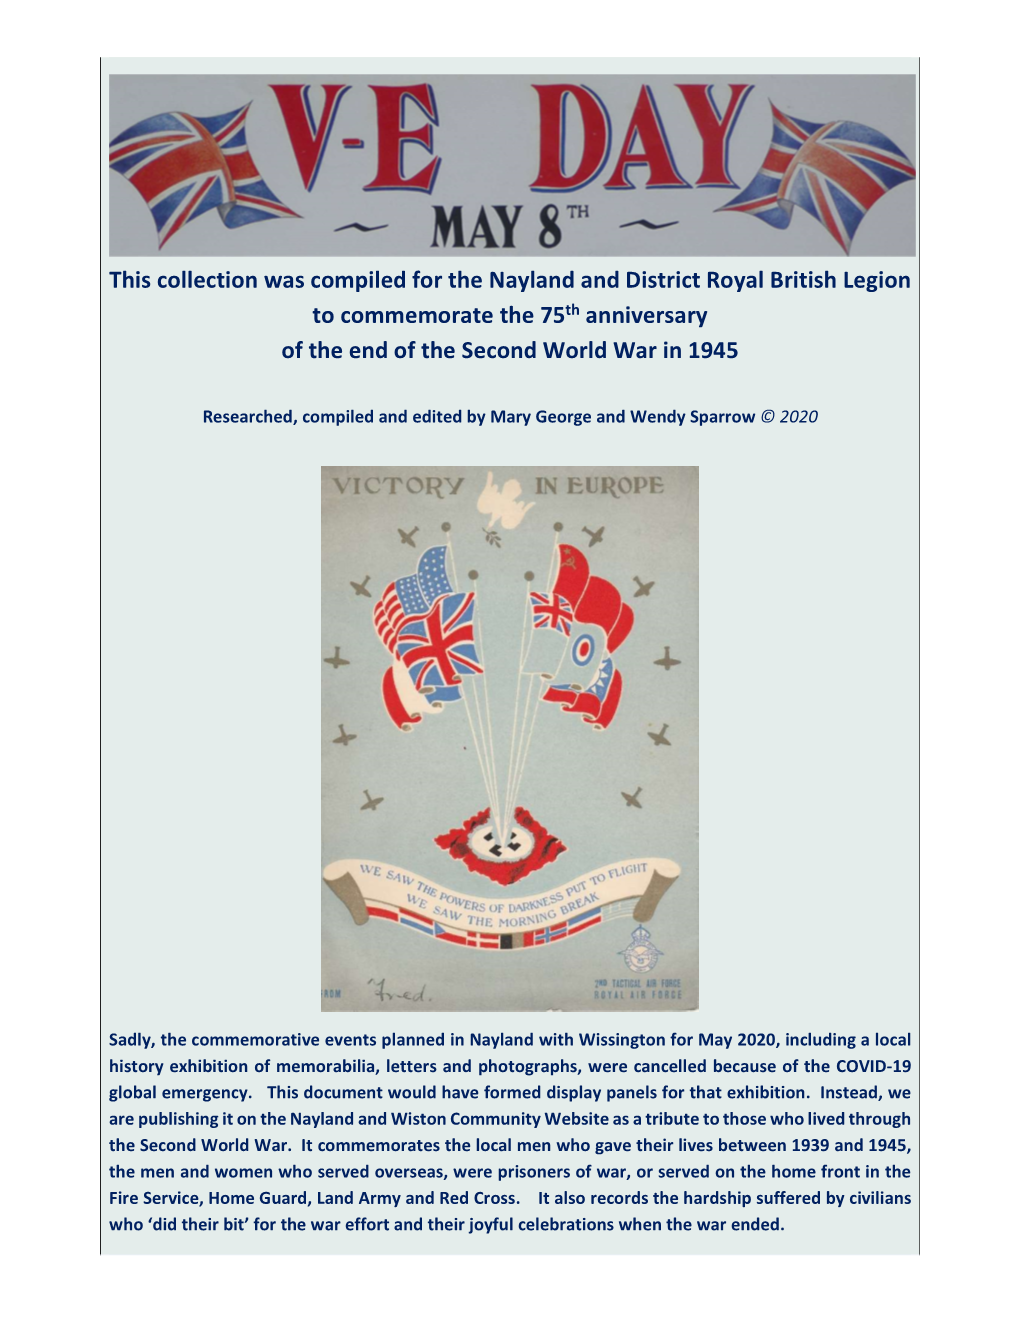 This Collection Was Compiled for the Nayland and District Royal British Legion to Commemorate the 75Th Anniversary of the End of the Second World War in 1945